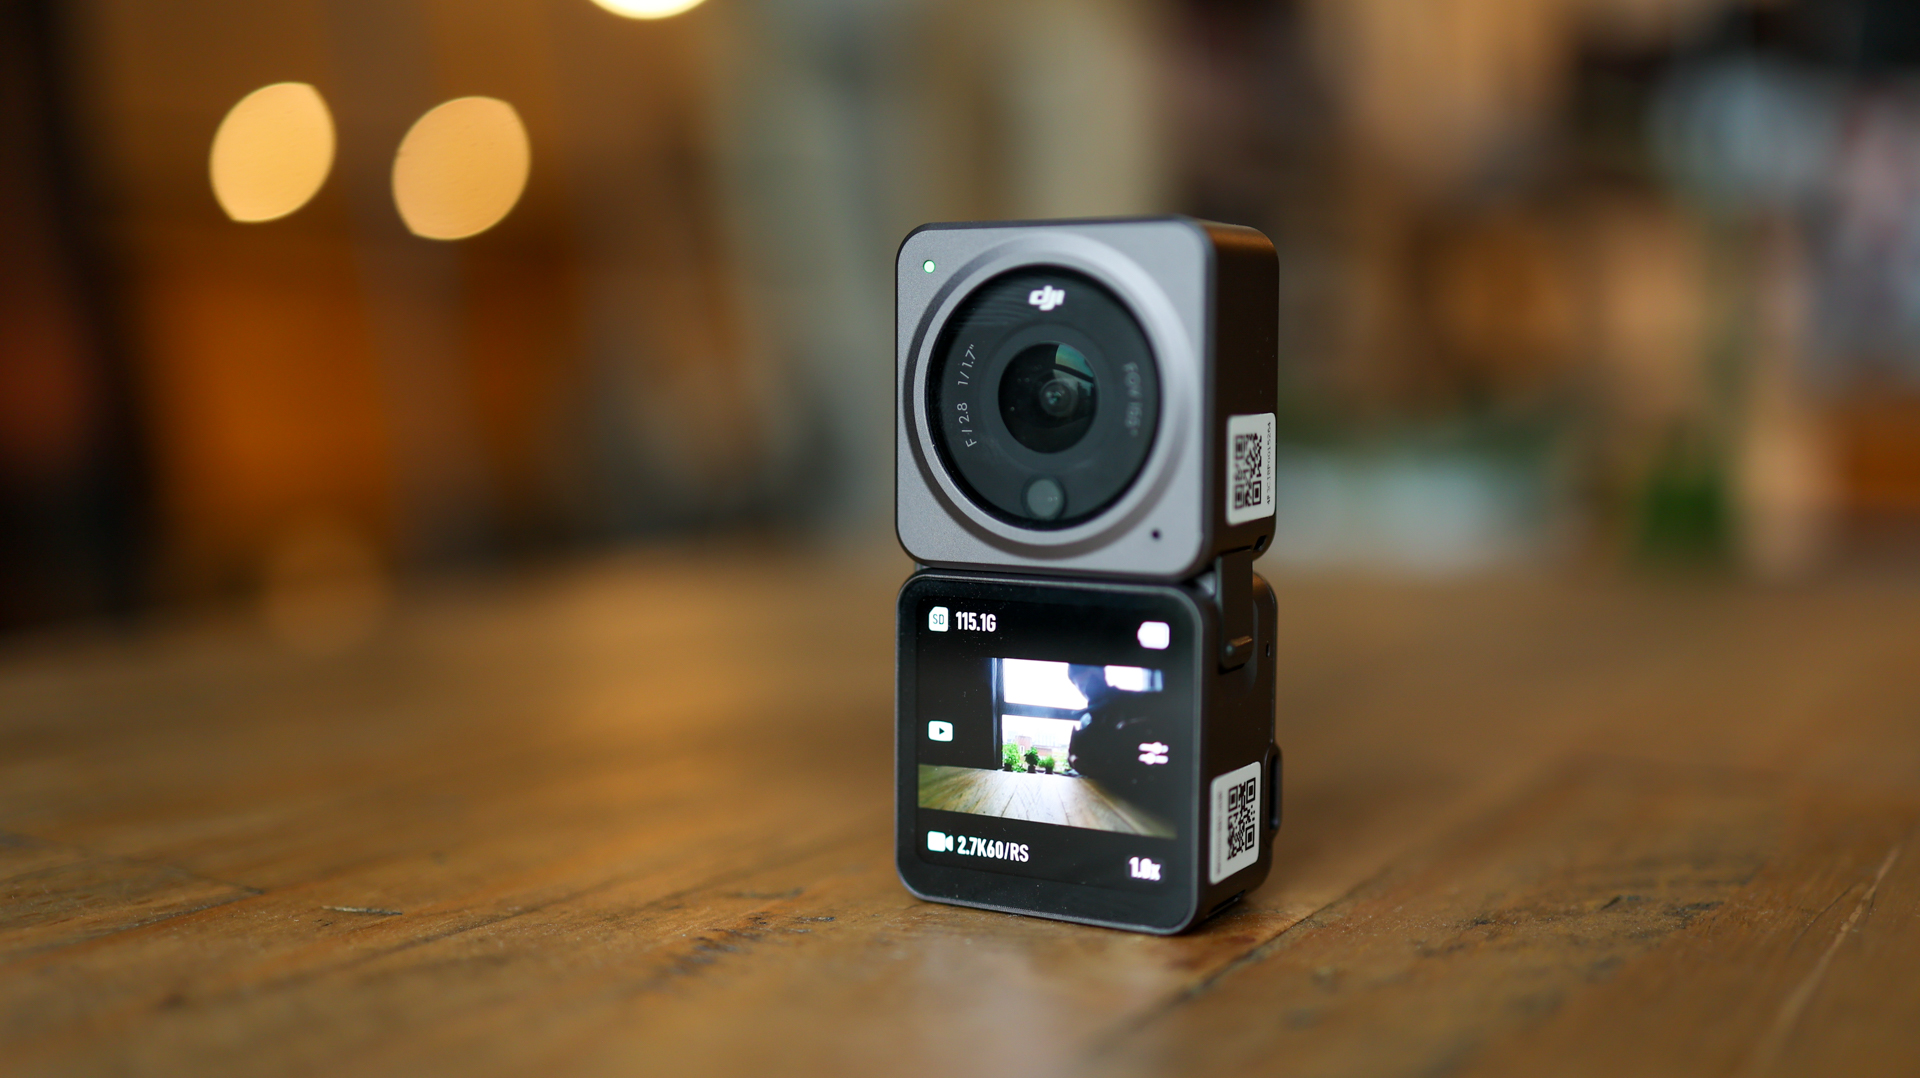 The DJI Action 2 action camera on a table with its display module